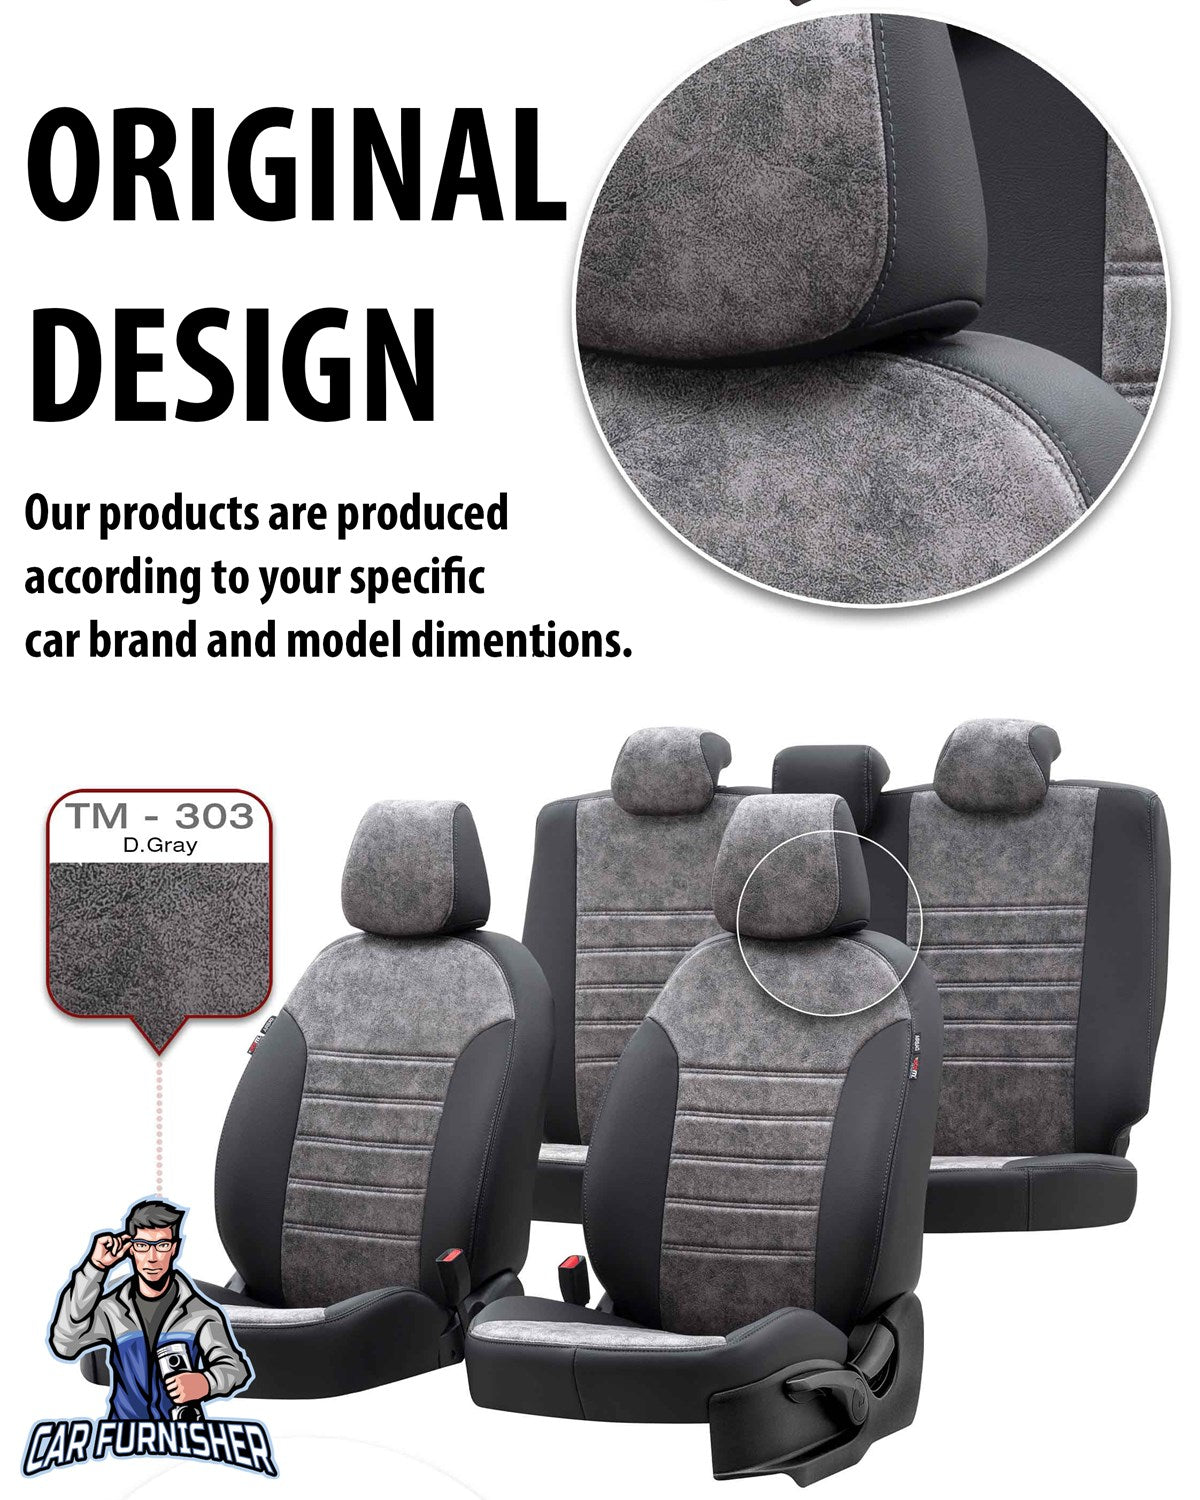 Ford S-Max Seat Covers Milano Suede Design Burgundy Leather & Suede Fabric